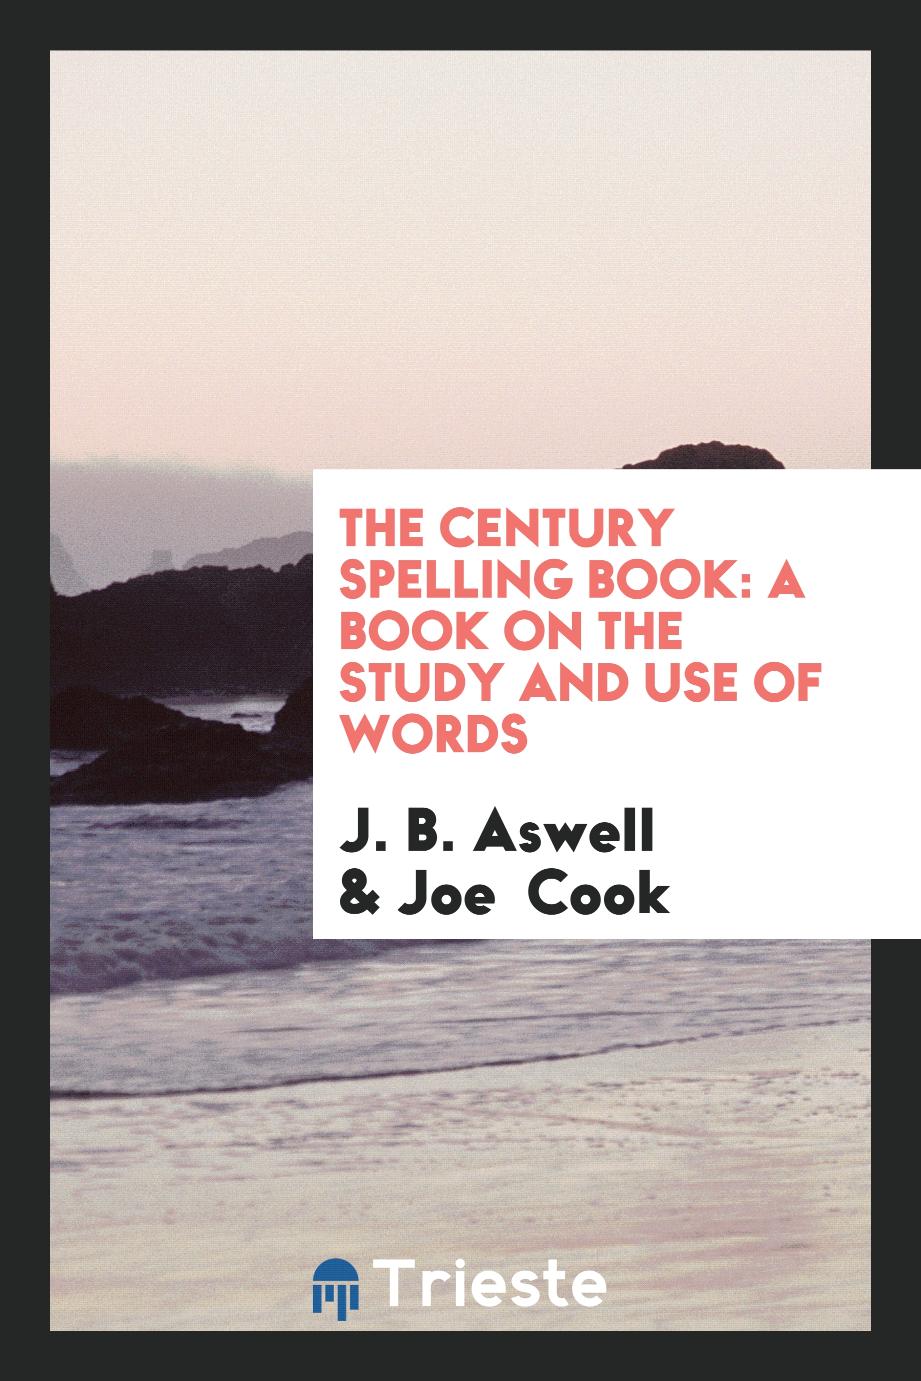 The Century Spelling Book: A Book on the Study and Use of Words